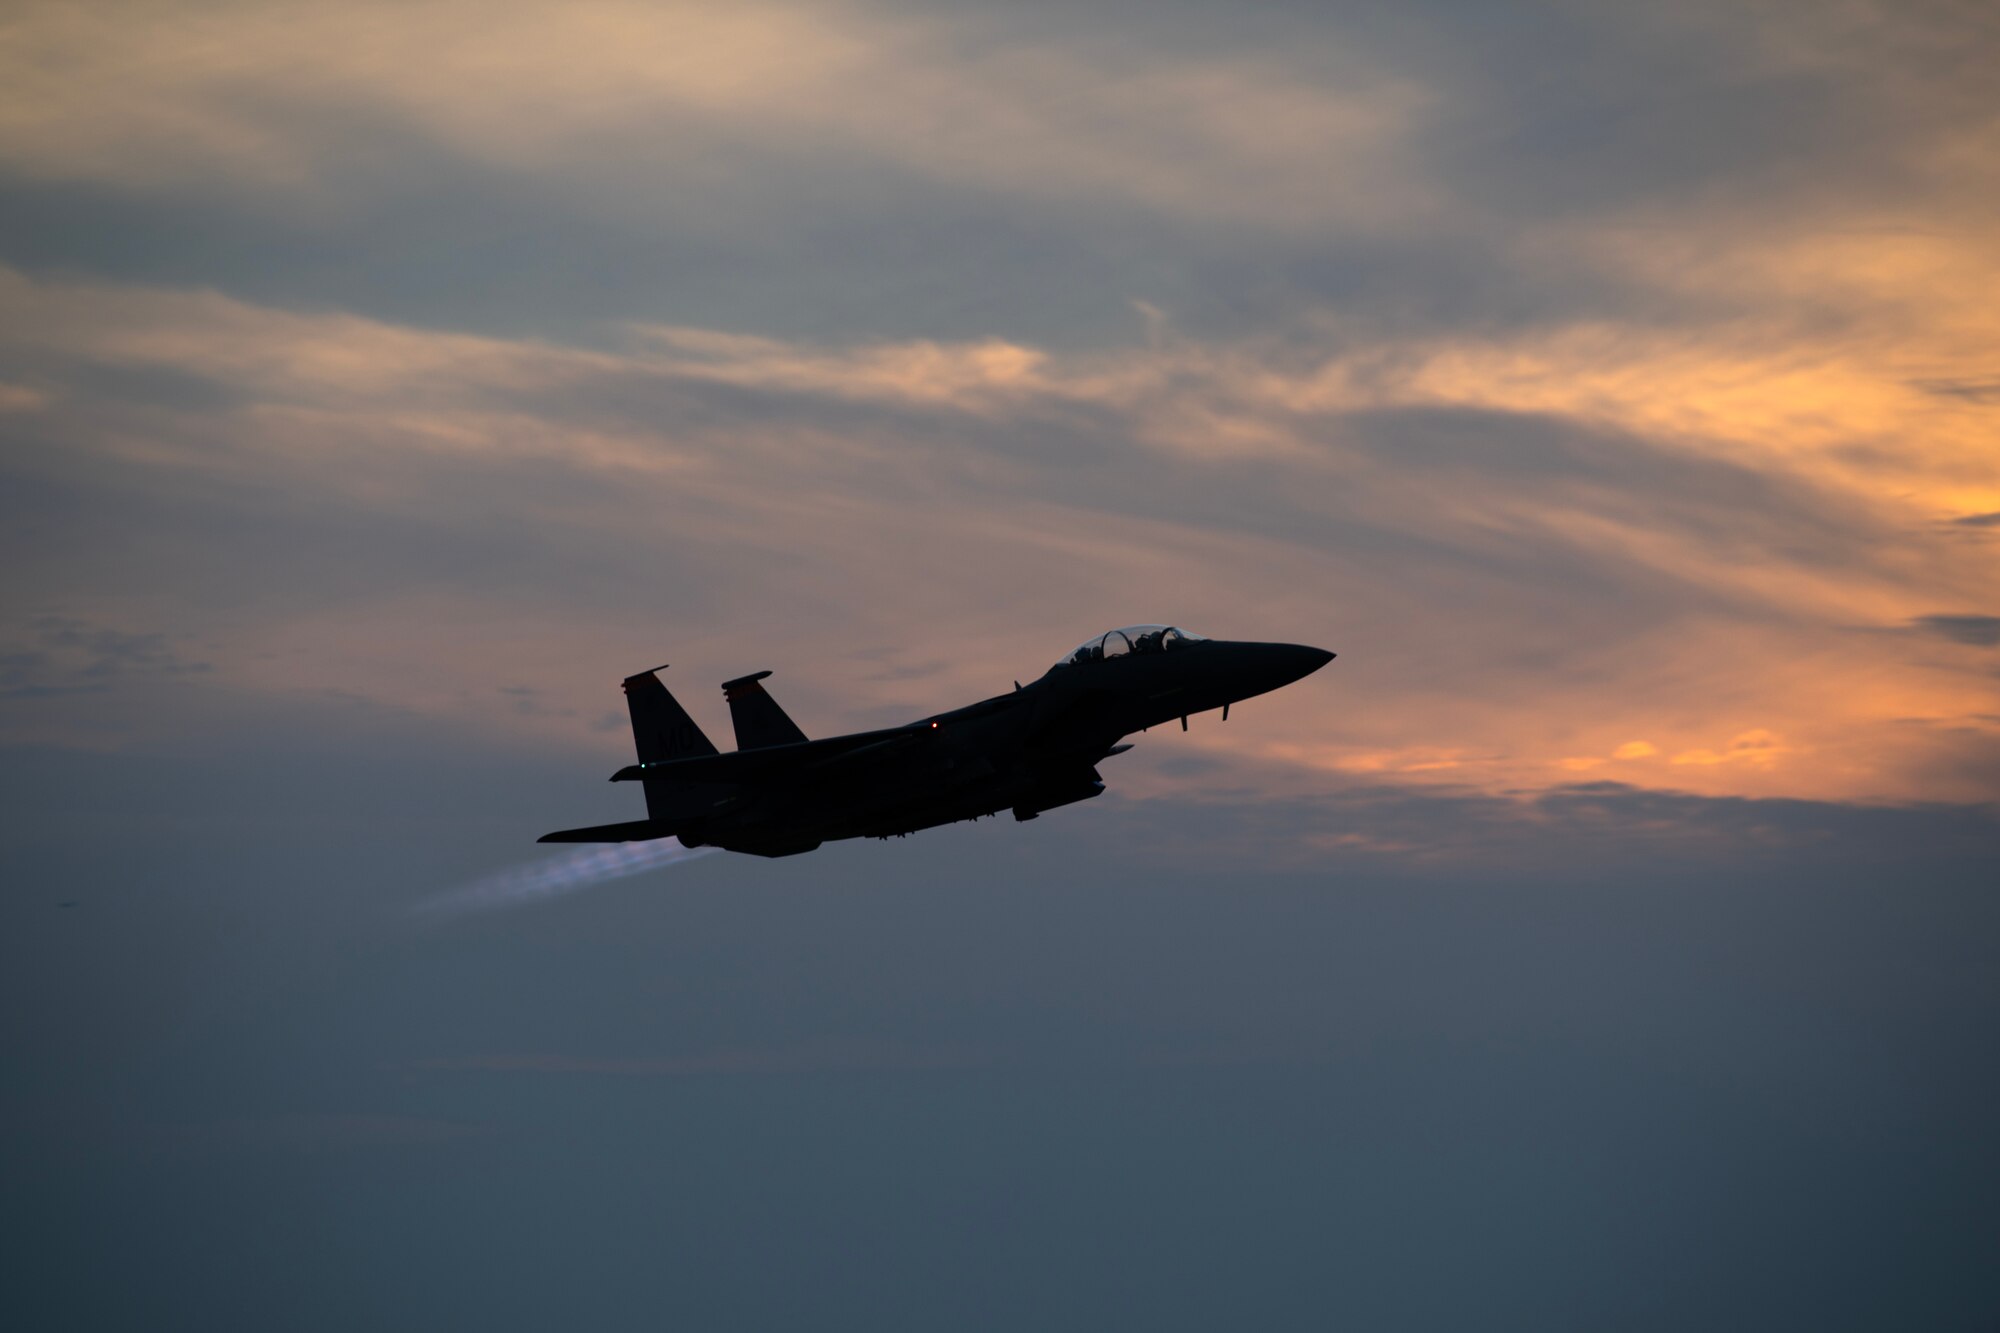 An F-15E Strike Eagle assigned to the 391st Fighter Squadron takes off from Kadena Air Base, Japan in support of exercise Southern Beach, May 16, 2023. Southern Beach is a continuous bilateral effort to enhance interoperability with host nation forces, strengthening the combined ability to execute high-end missions in defense of a free and open Indo-Pacific region. (U.S. Air Force photo by Staff Sgt. Jessi Roth)